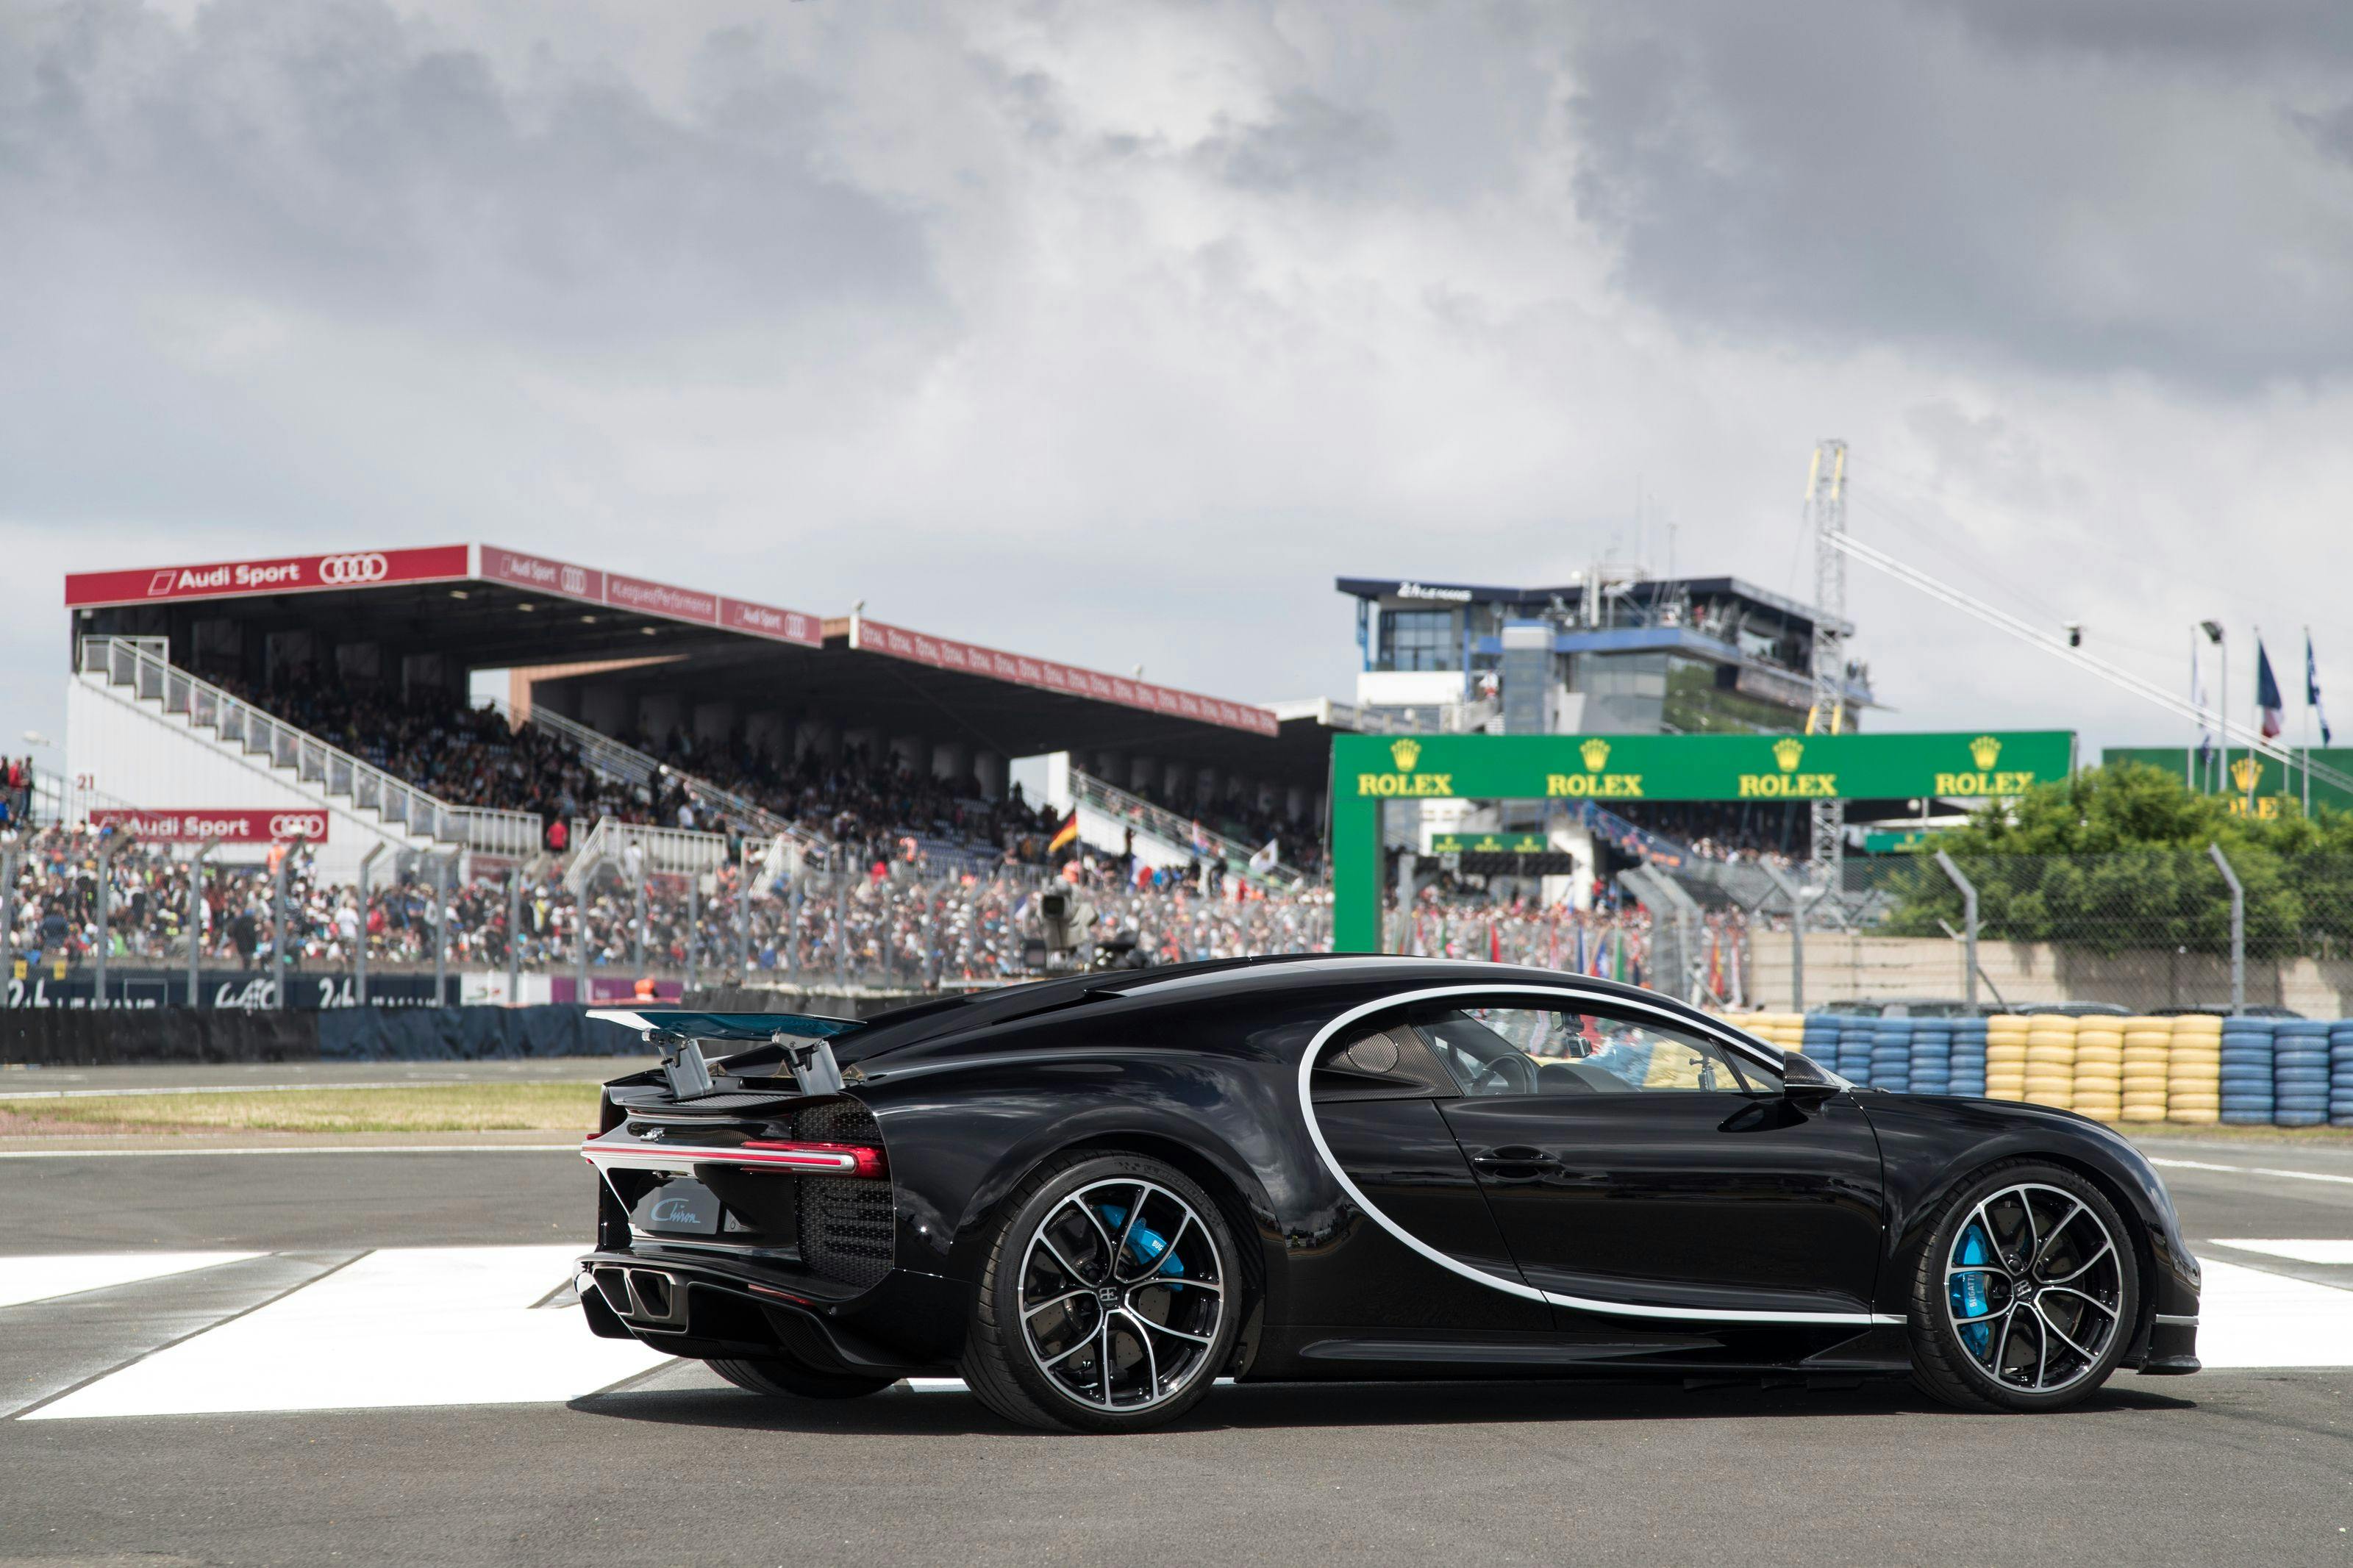 Bugatti Chiron celebrates its debut in France at the 24 Hours of Le Mans